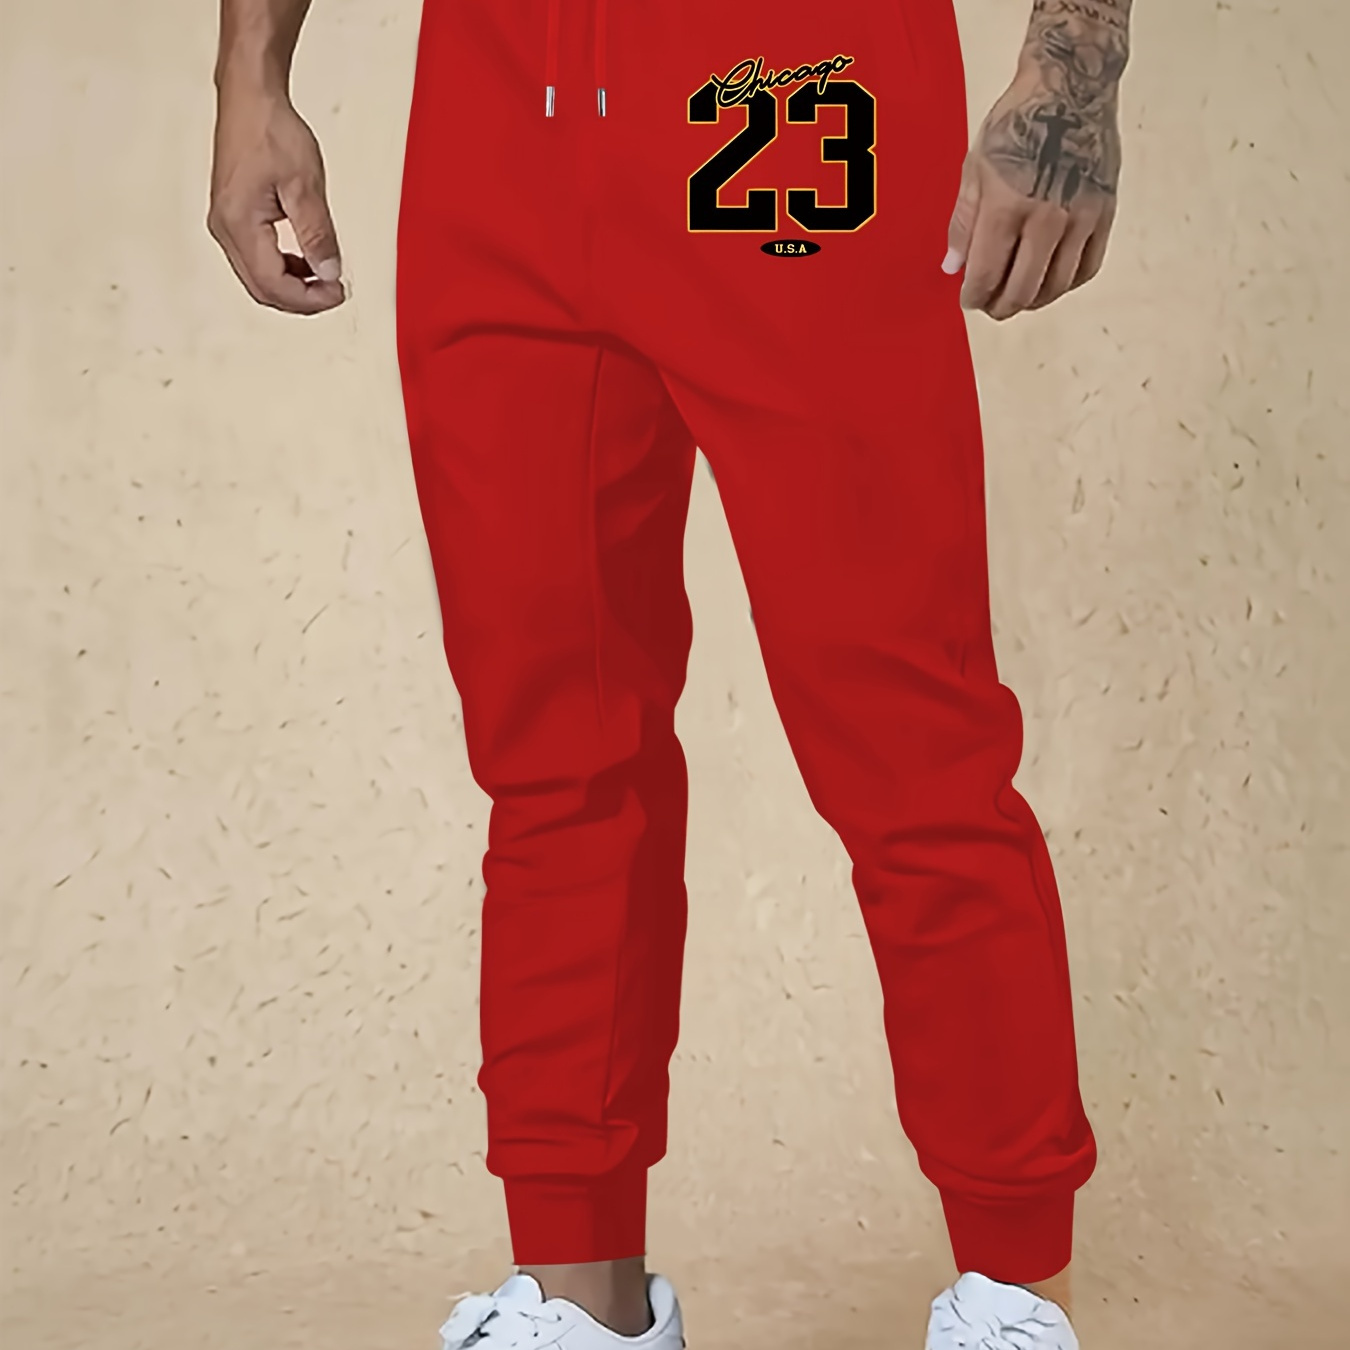 

Chicago 23 Usa Print, Men's Drawstring Sweatpants With Fleece, Casual Warm And Comfy Jogger Pants For Men